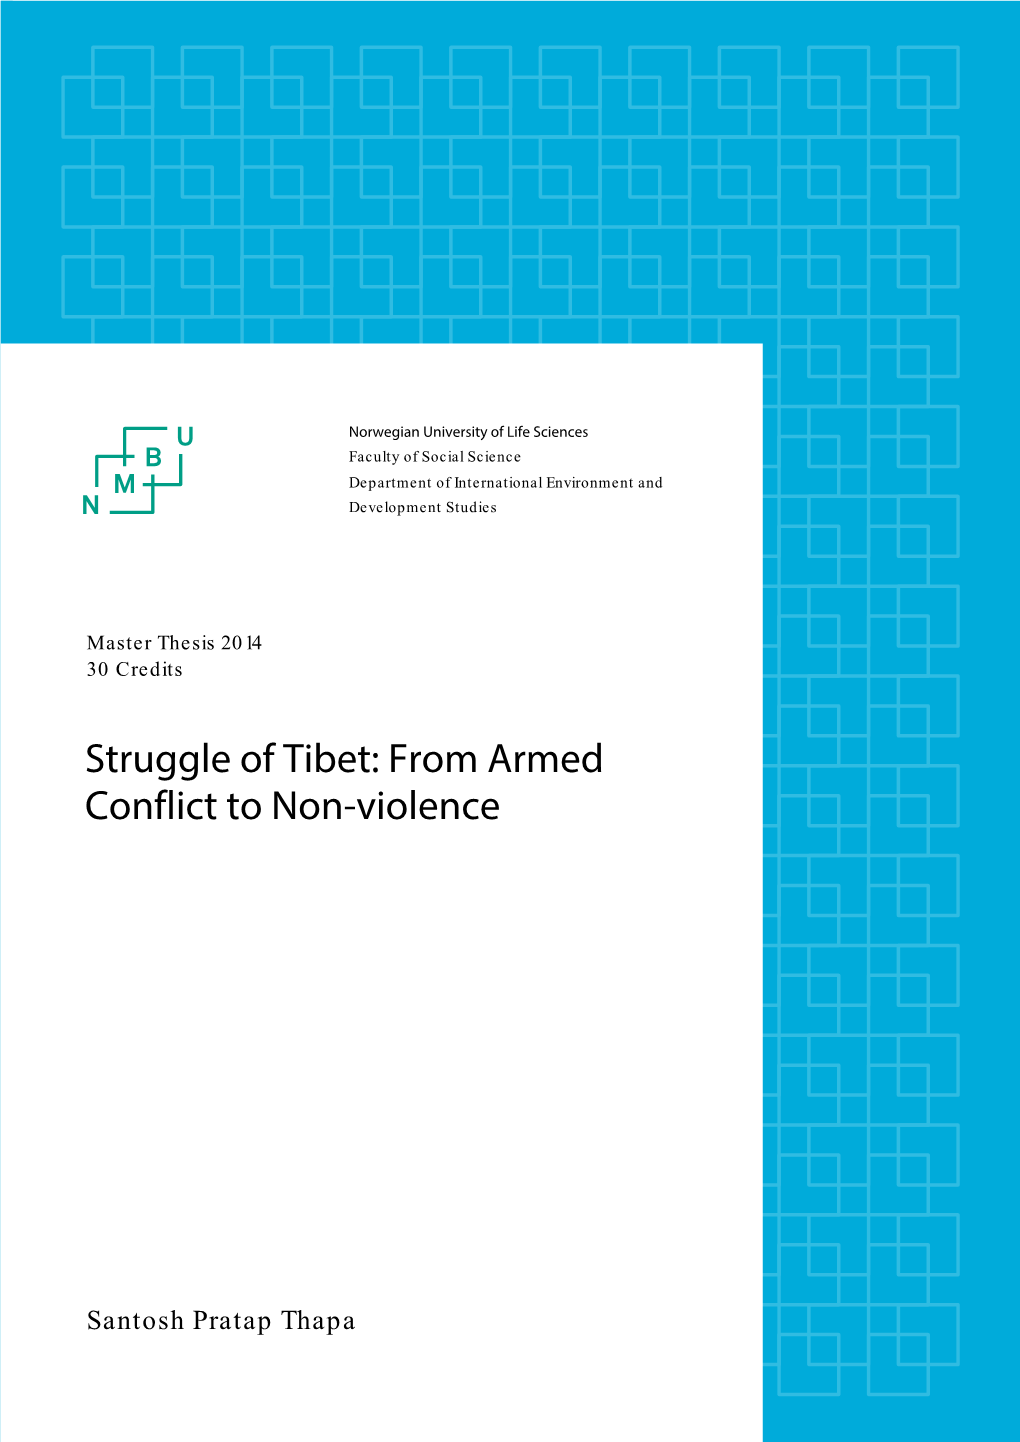 Struggle of Tibet: from Armed Conflict to Non-Violence’’